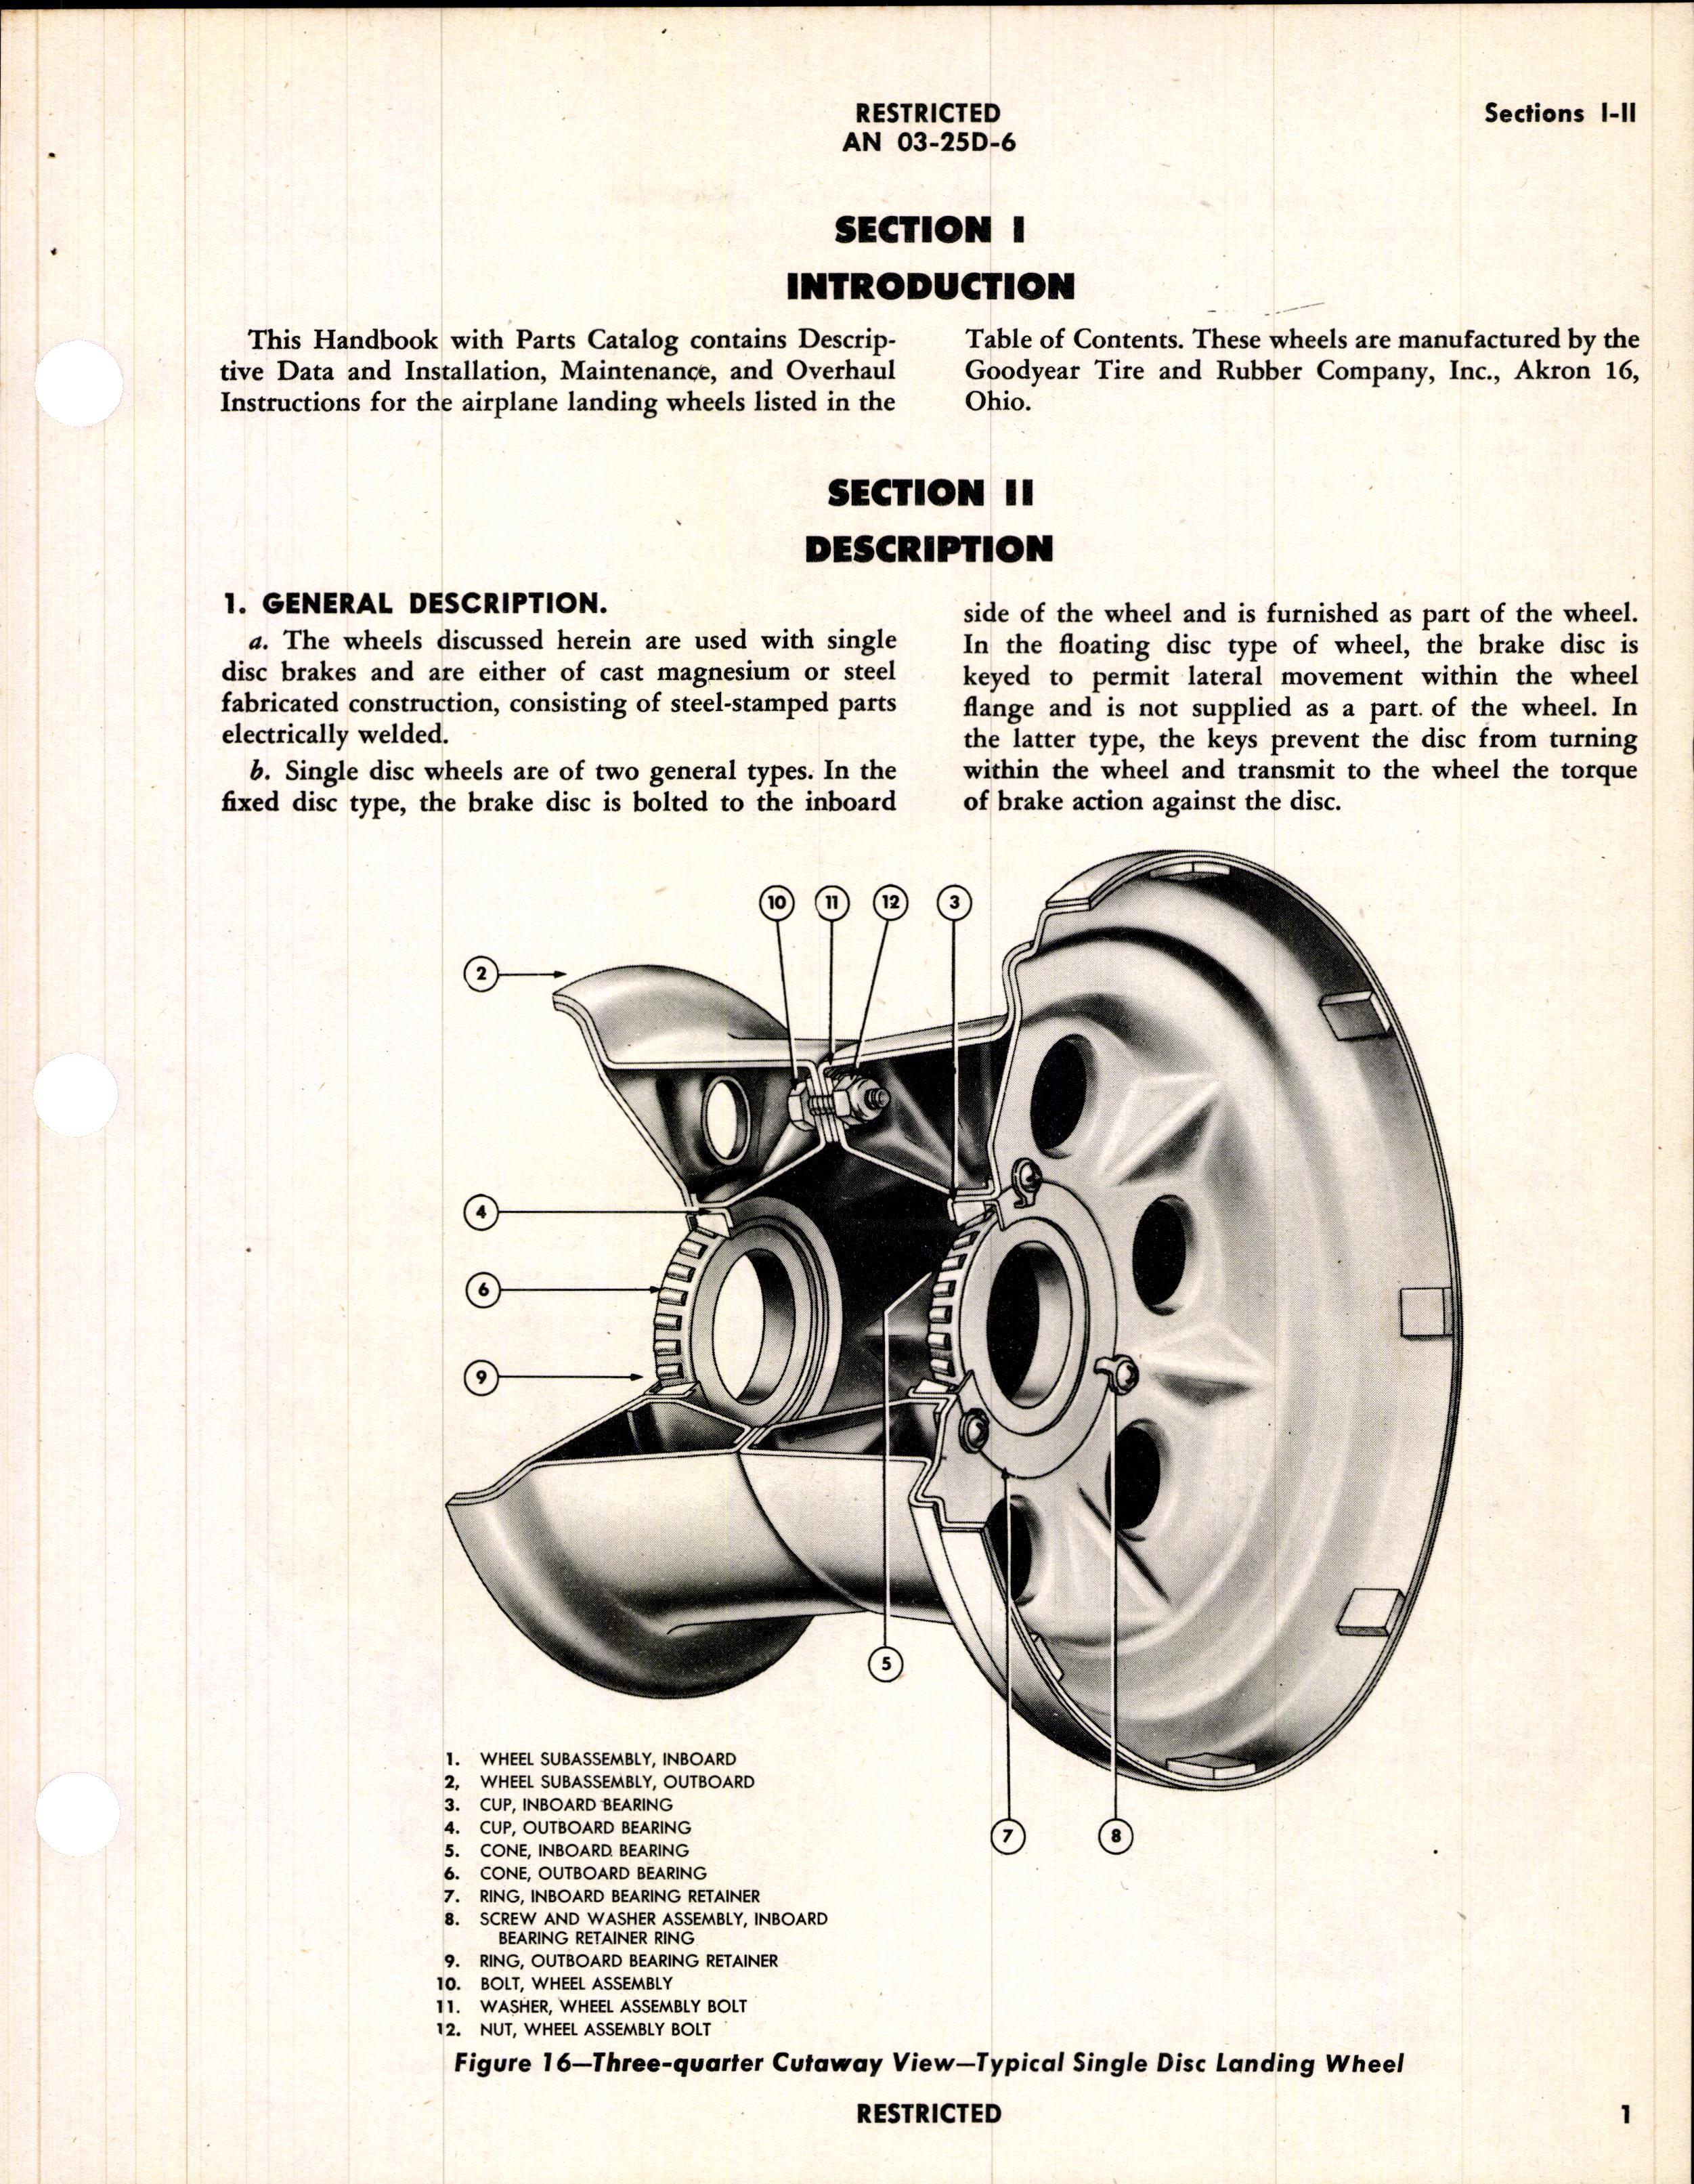 Sample page 9 from AirCorps Library document: Handbook of Instructions with Parts Catalog for Landing Wheels for use with Single Disc Brakes